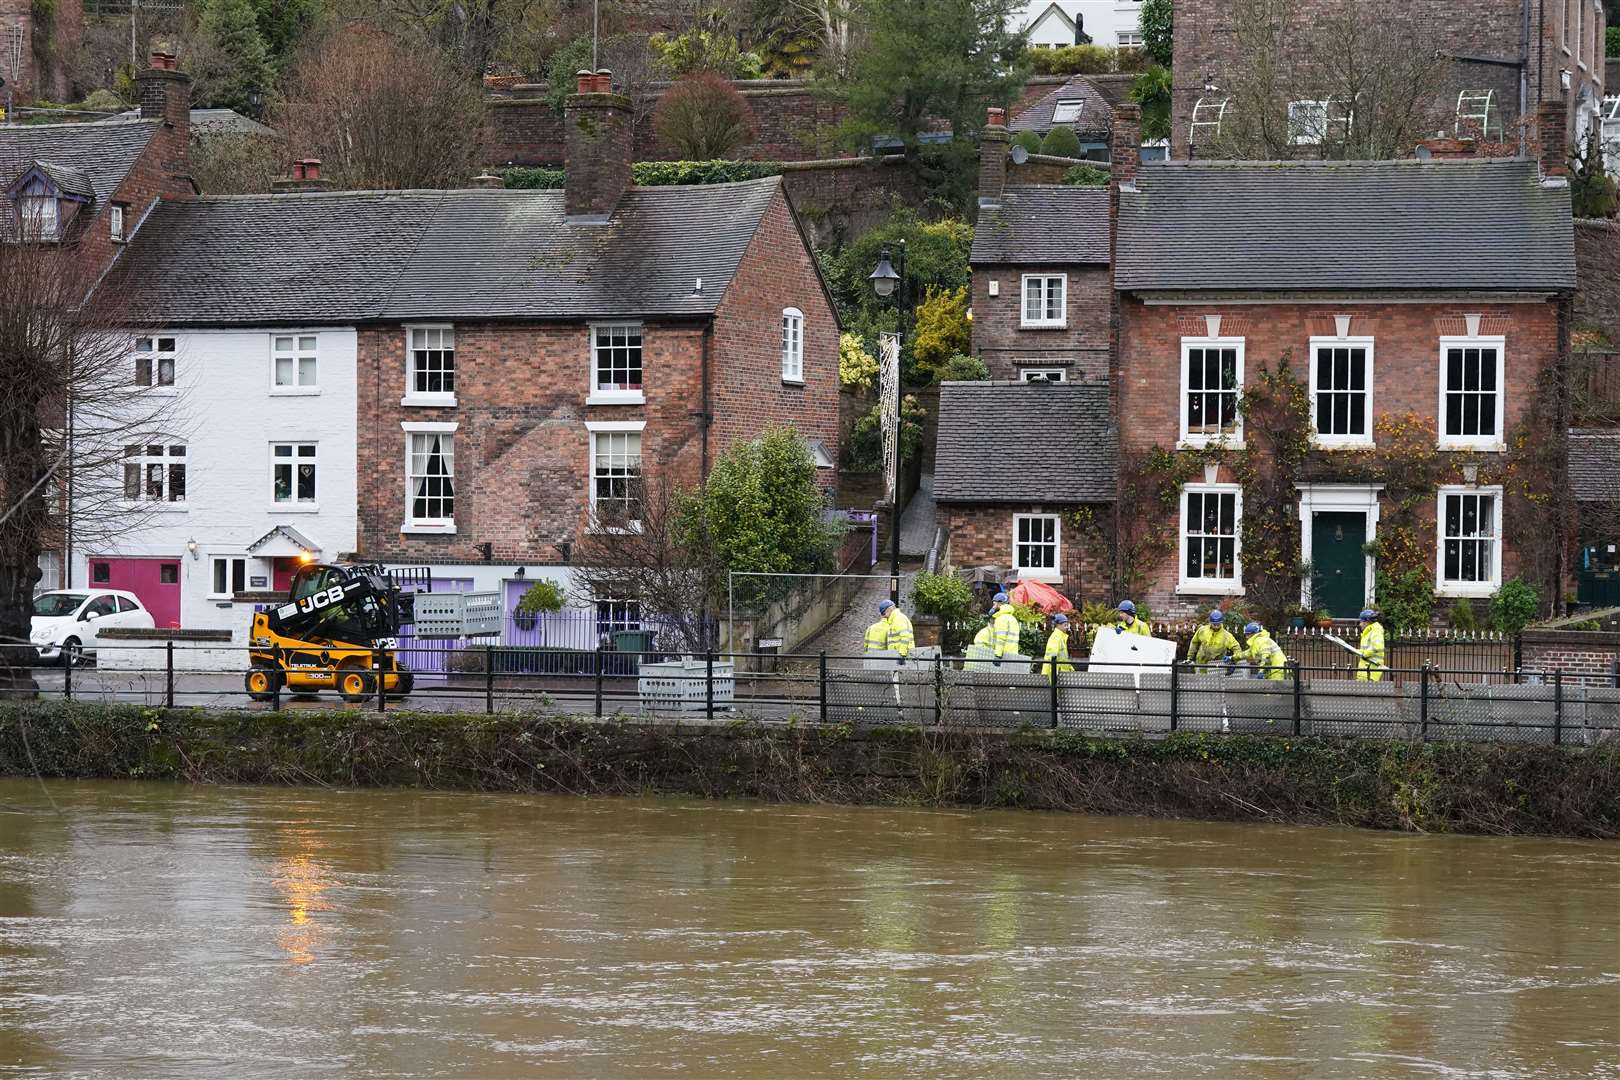 Flood defences were put up along the swollen River Severn at Ironbridge in Telford, Shropshire (Nick Potts/PA)